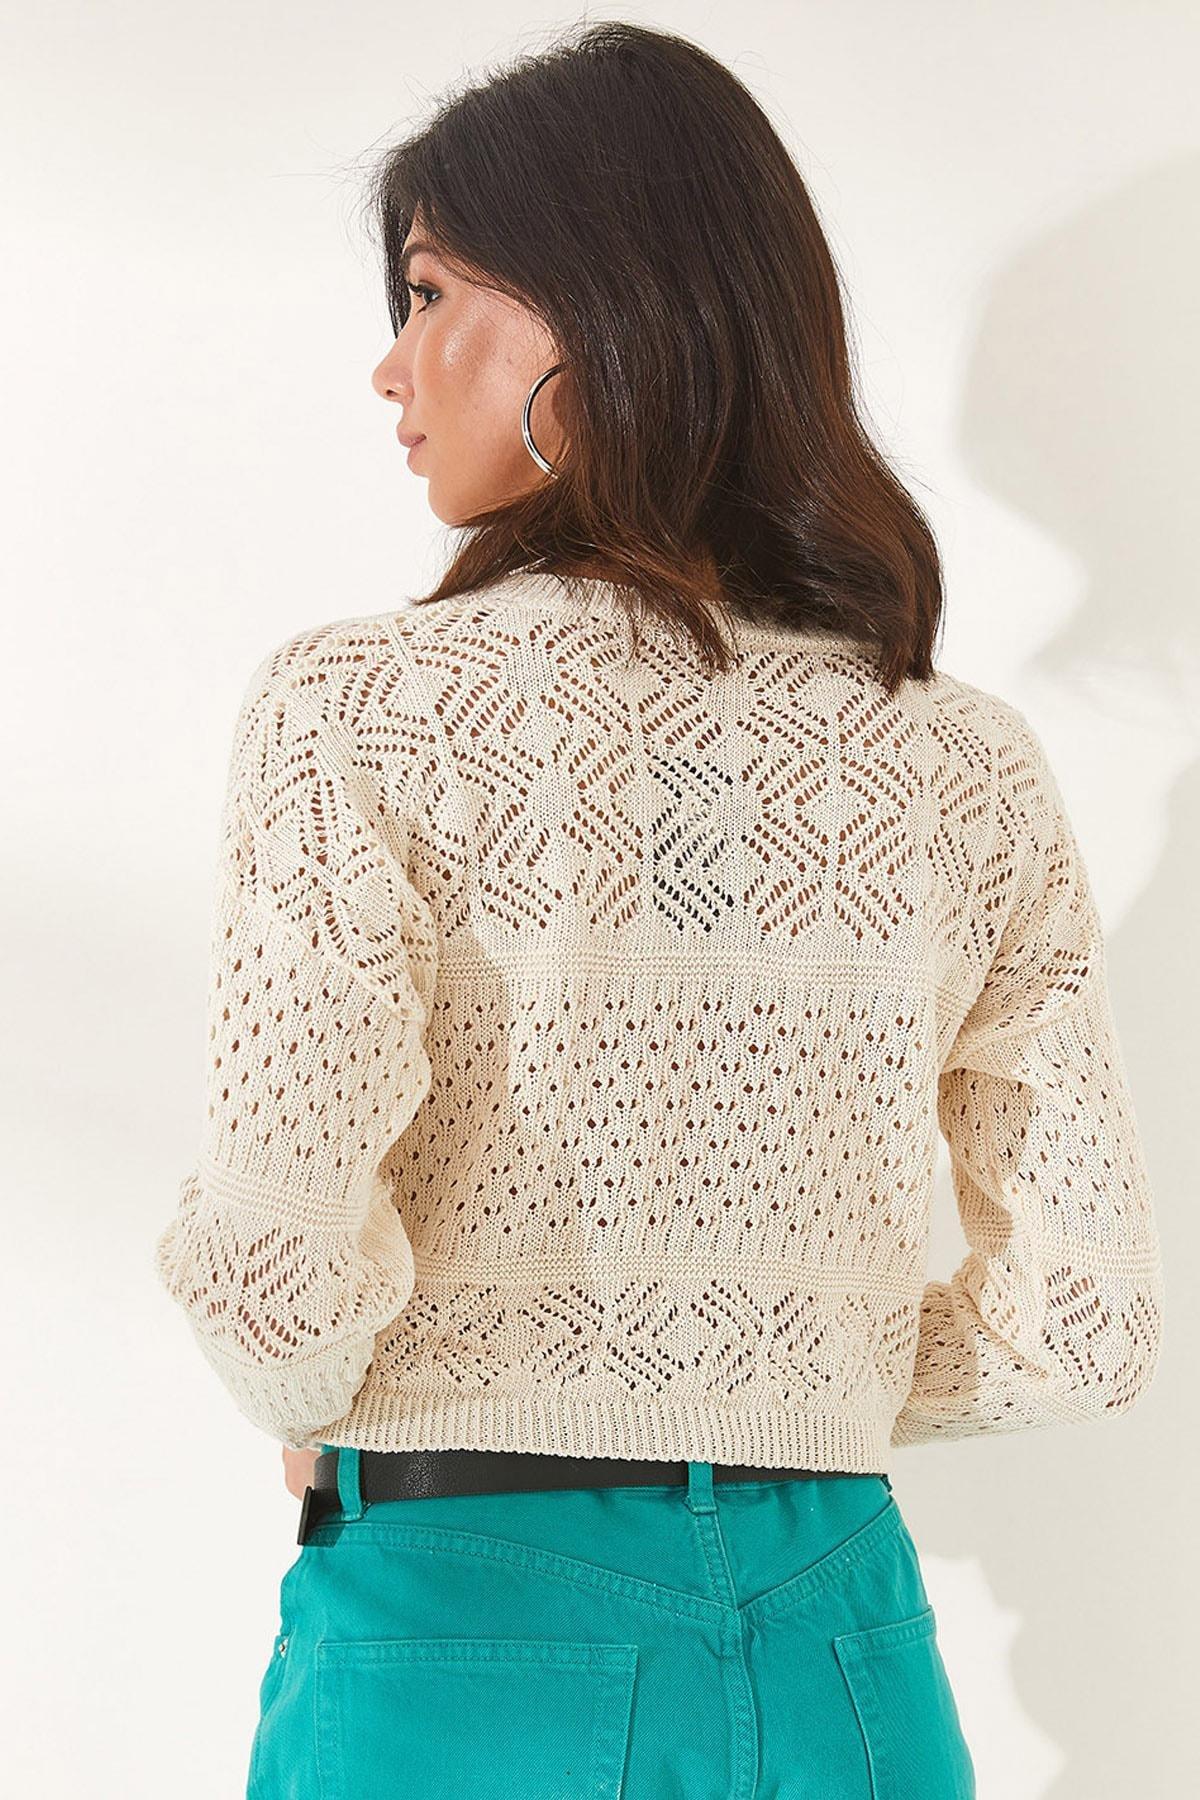 Olalook - White Patterned Knitted Blouse